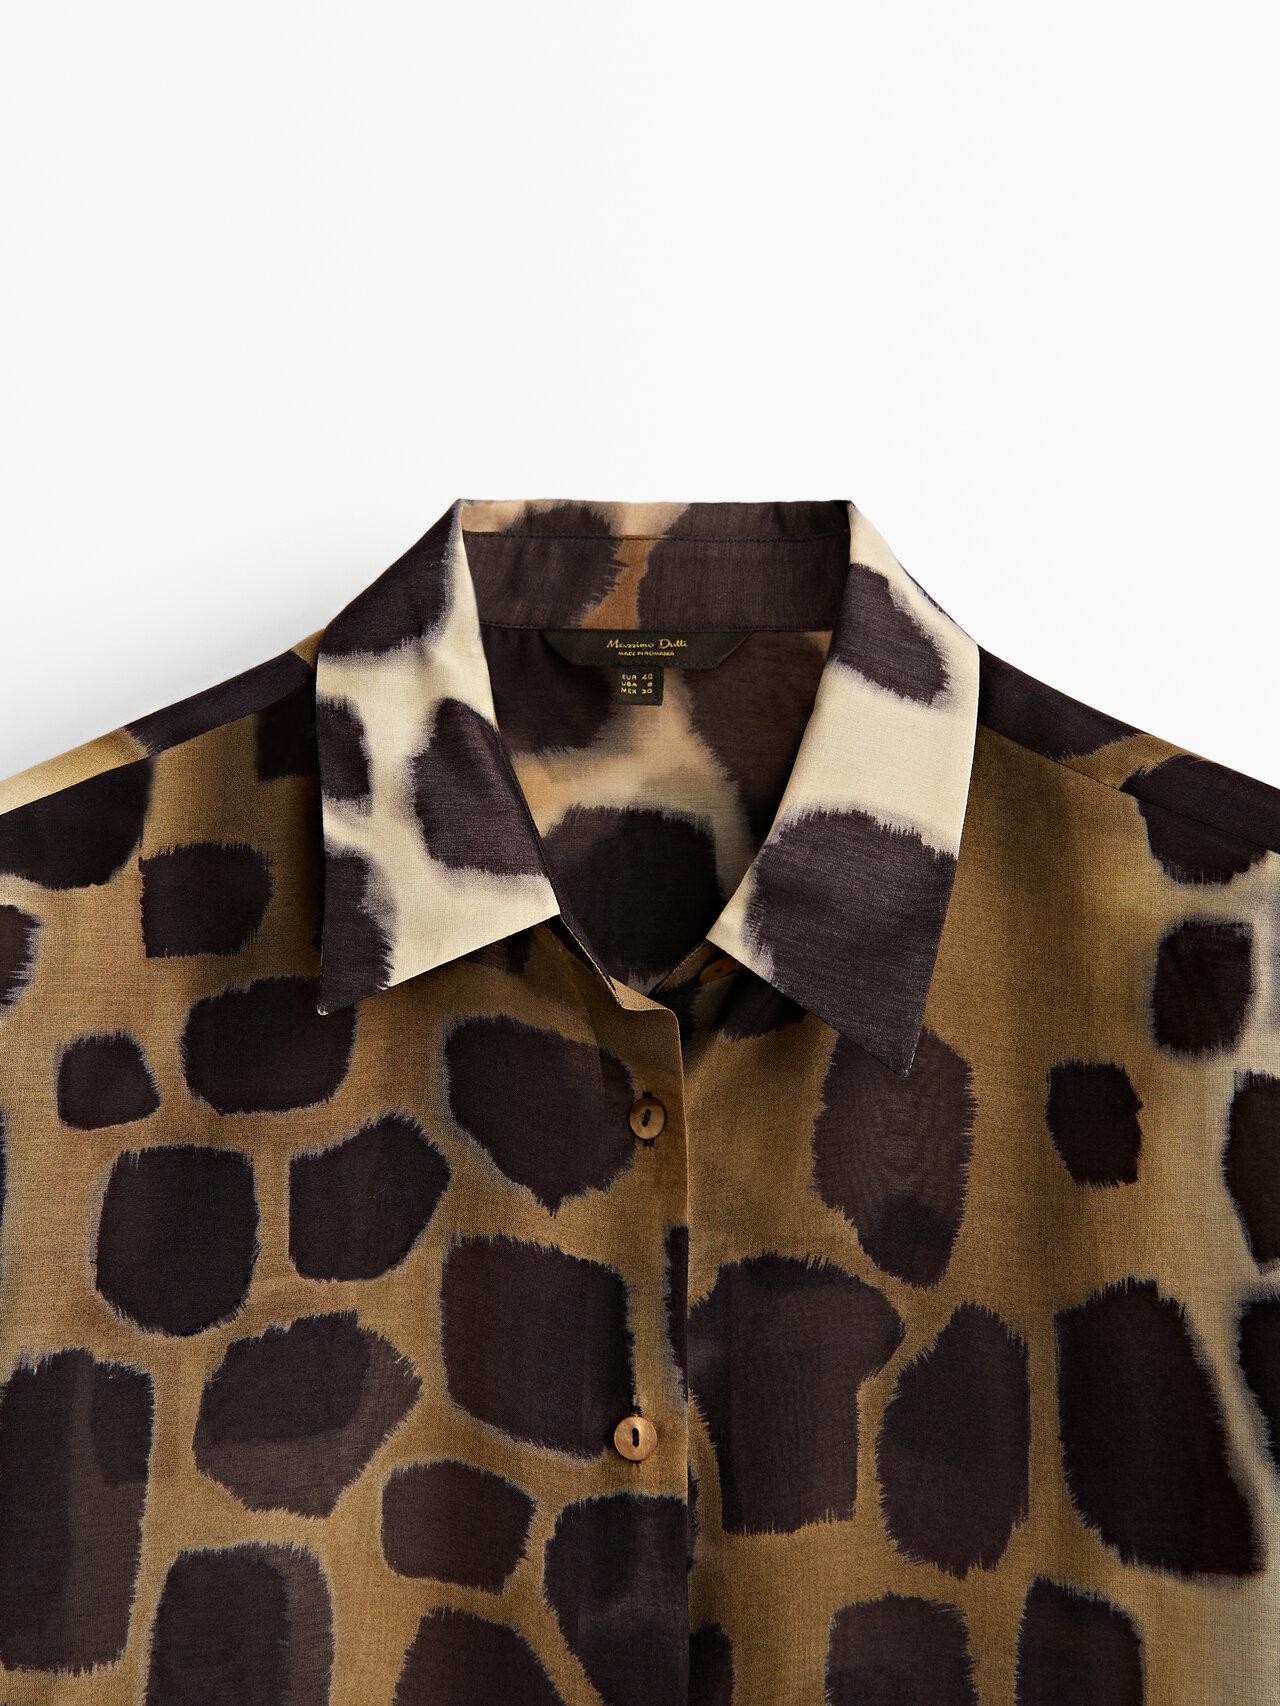 MASSIMO DUTTI Animal Print Cotton And Silk Shirt in Brown - Lyst